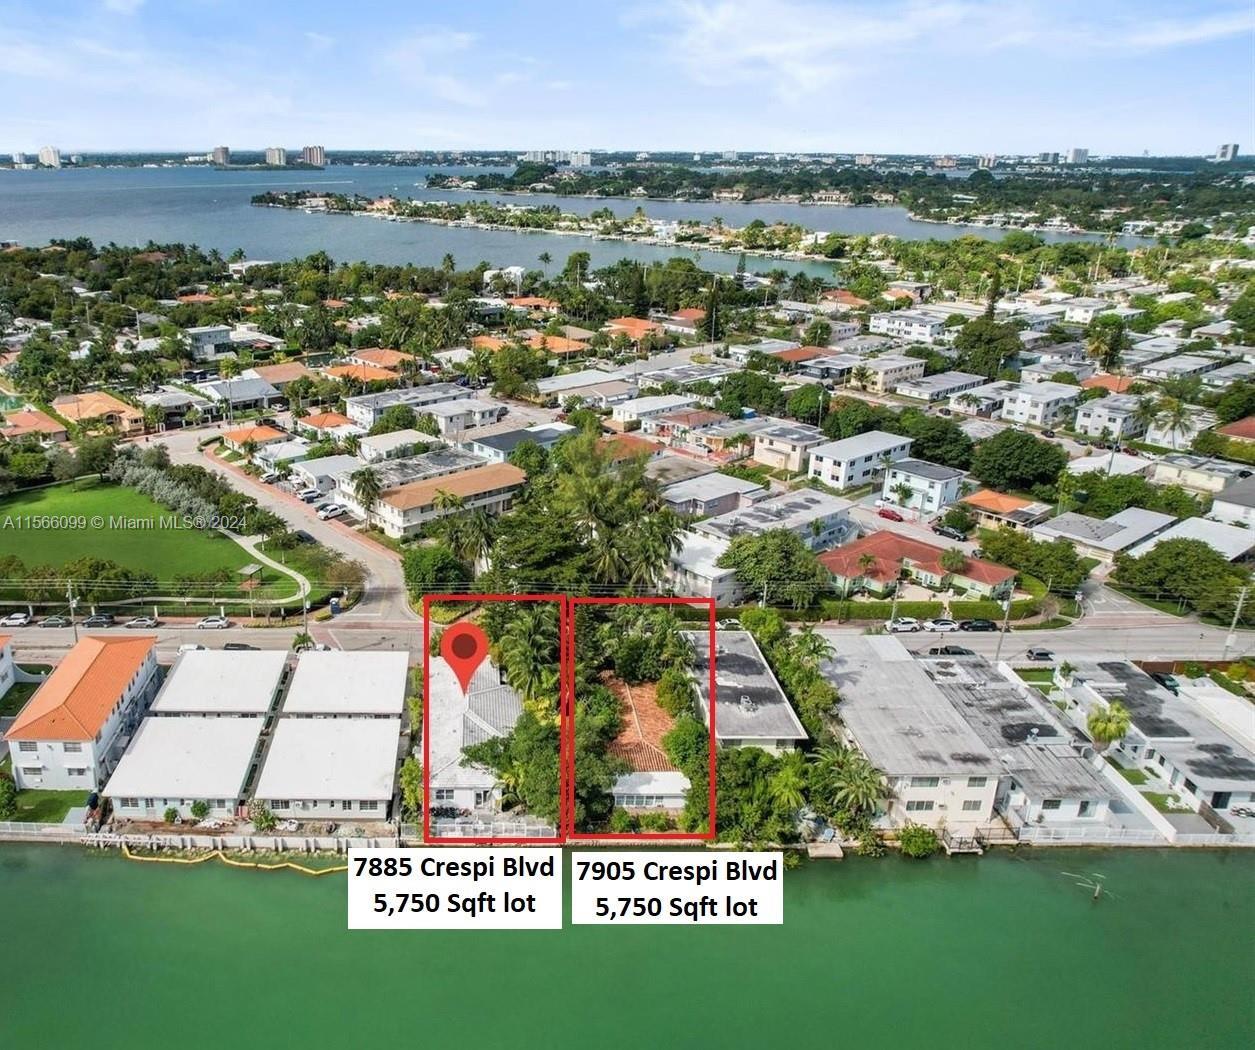 Amazing opportunity to own a waterfront duplex plus a studio in non-gated Biscayne Point. The lot is